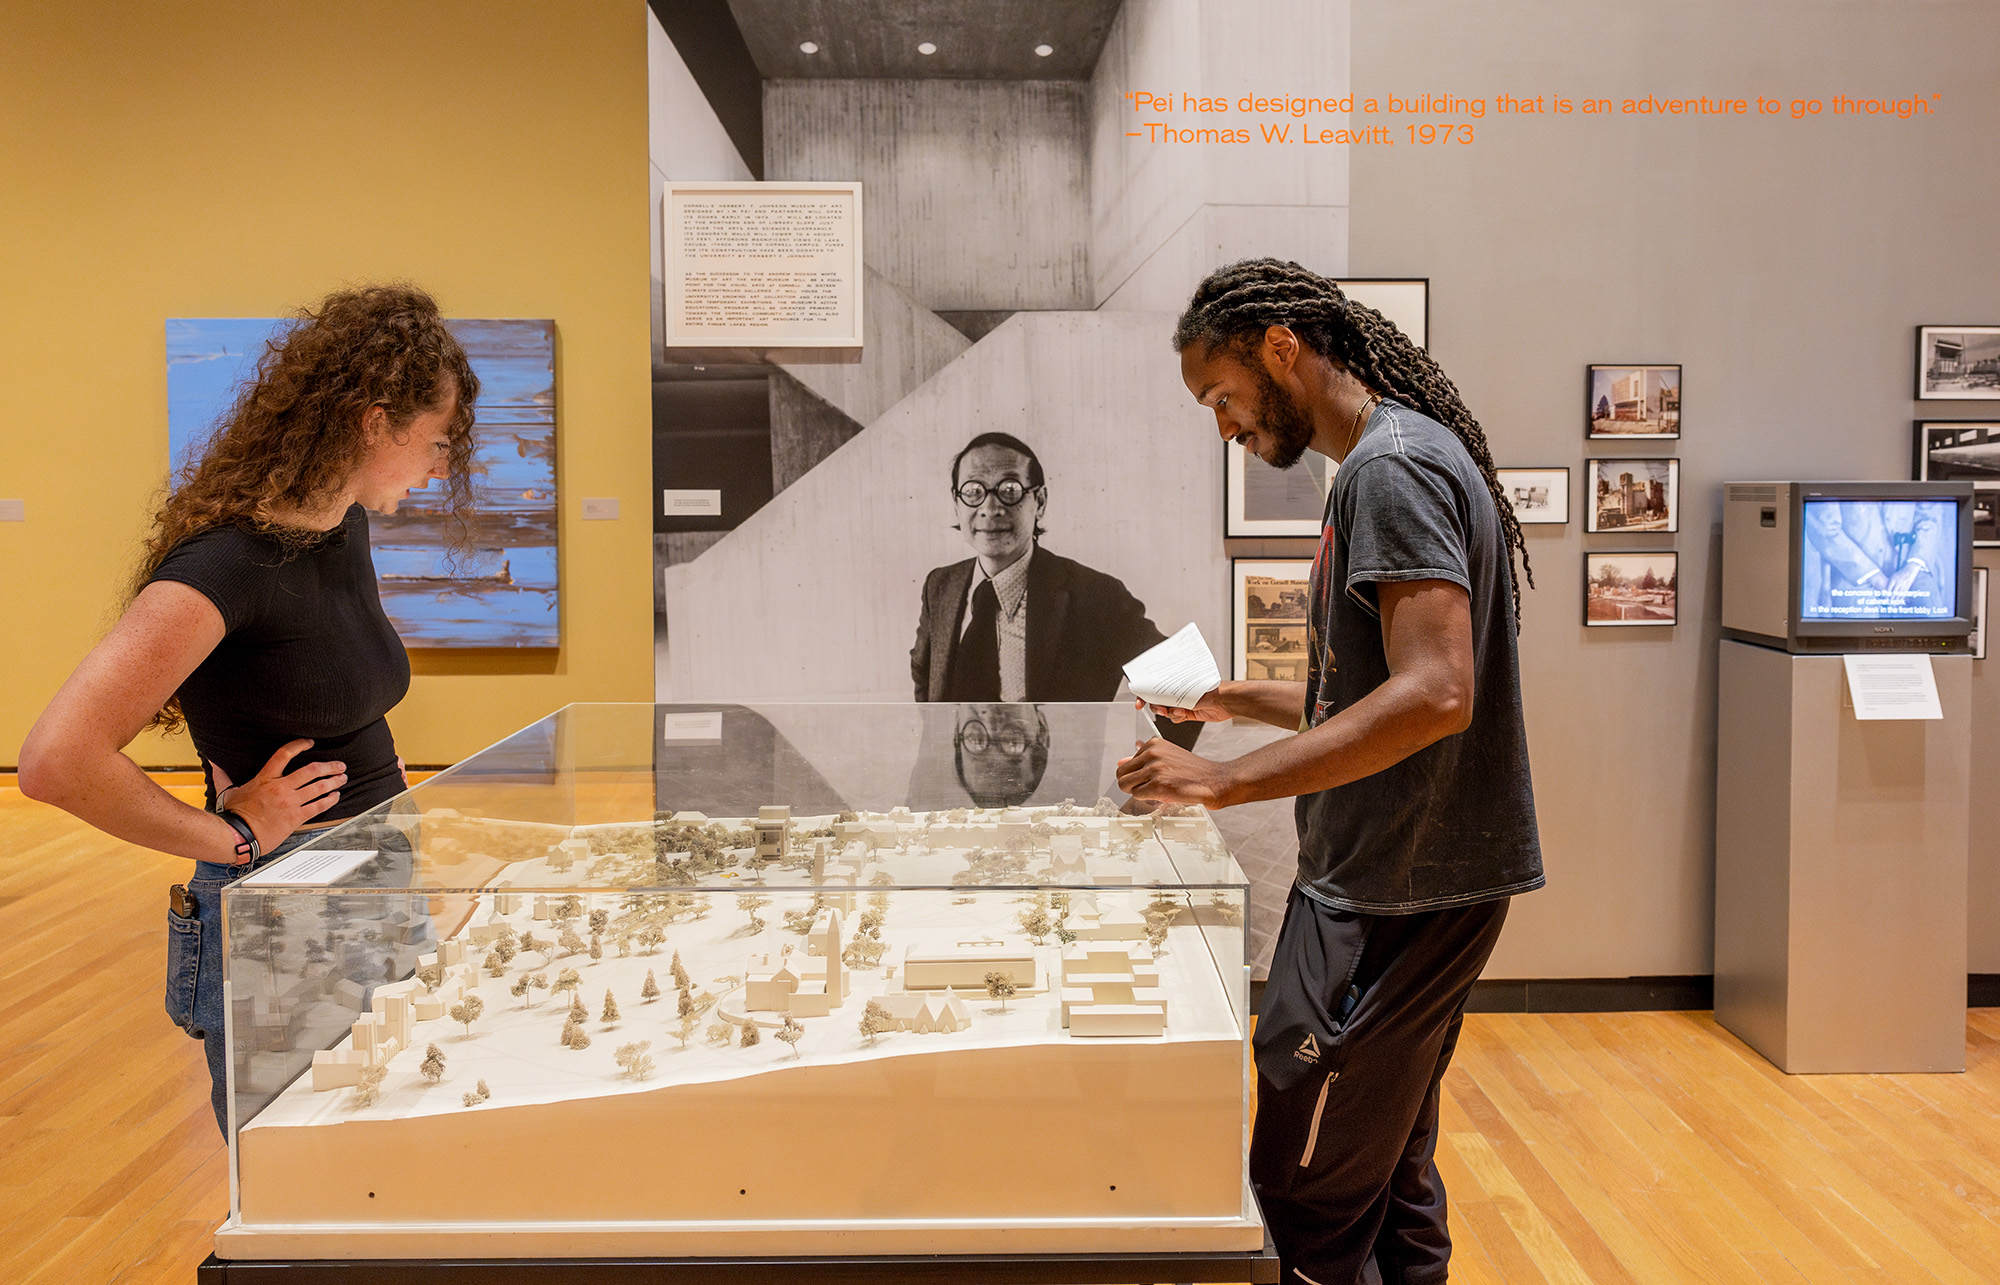 A man and woman look at a white architectural model in a museum gallery with art and a large photo of architect IM Pei